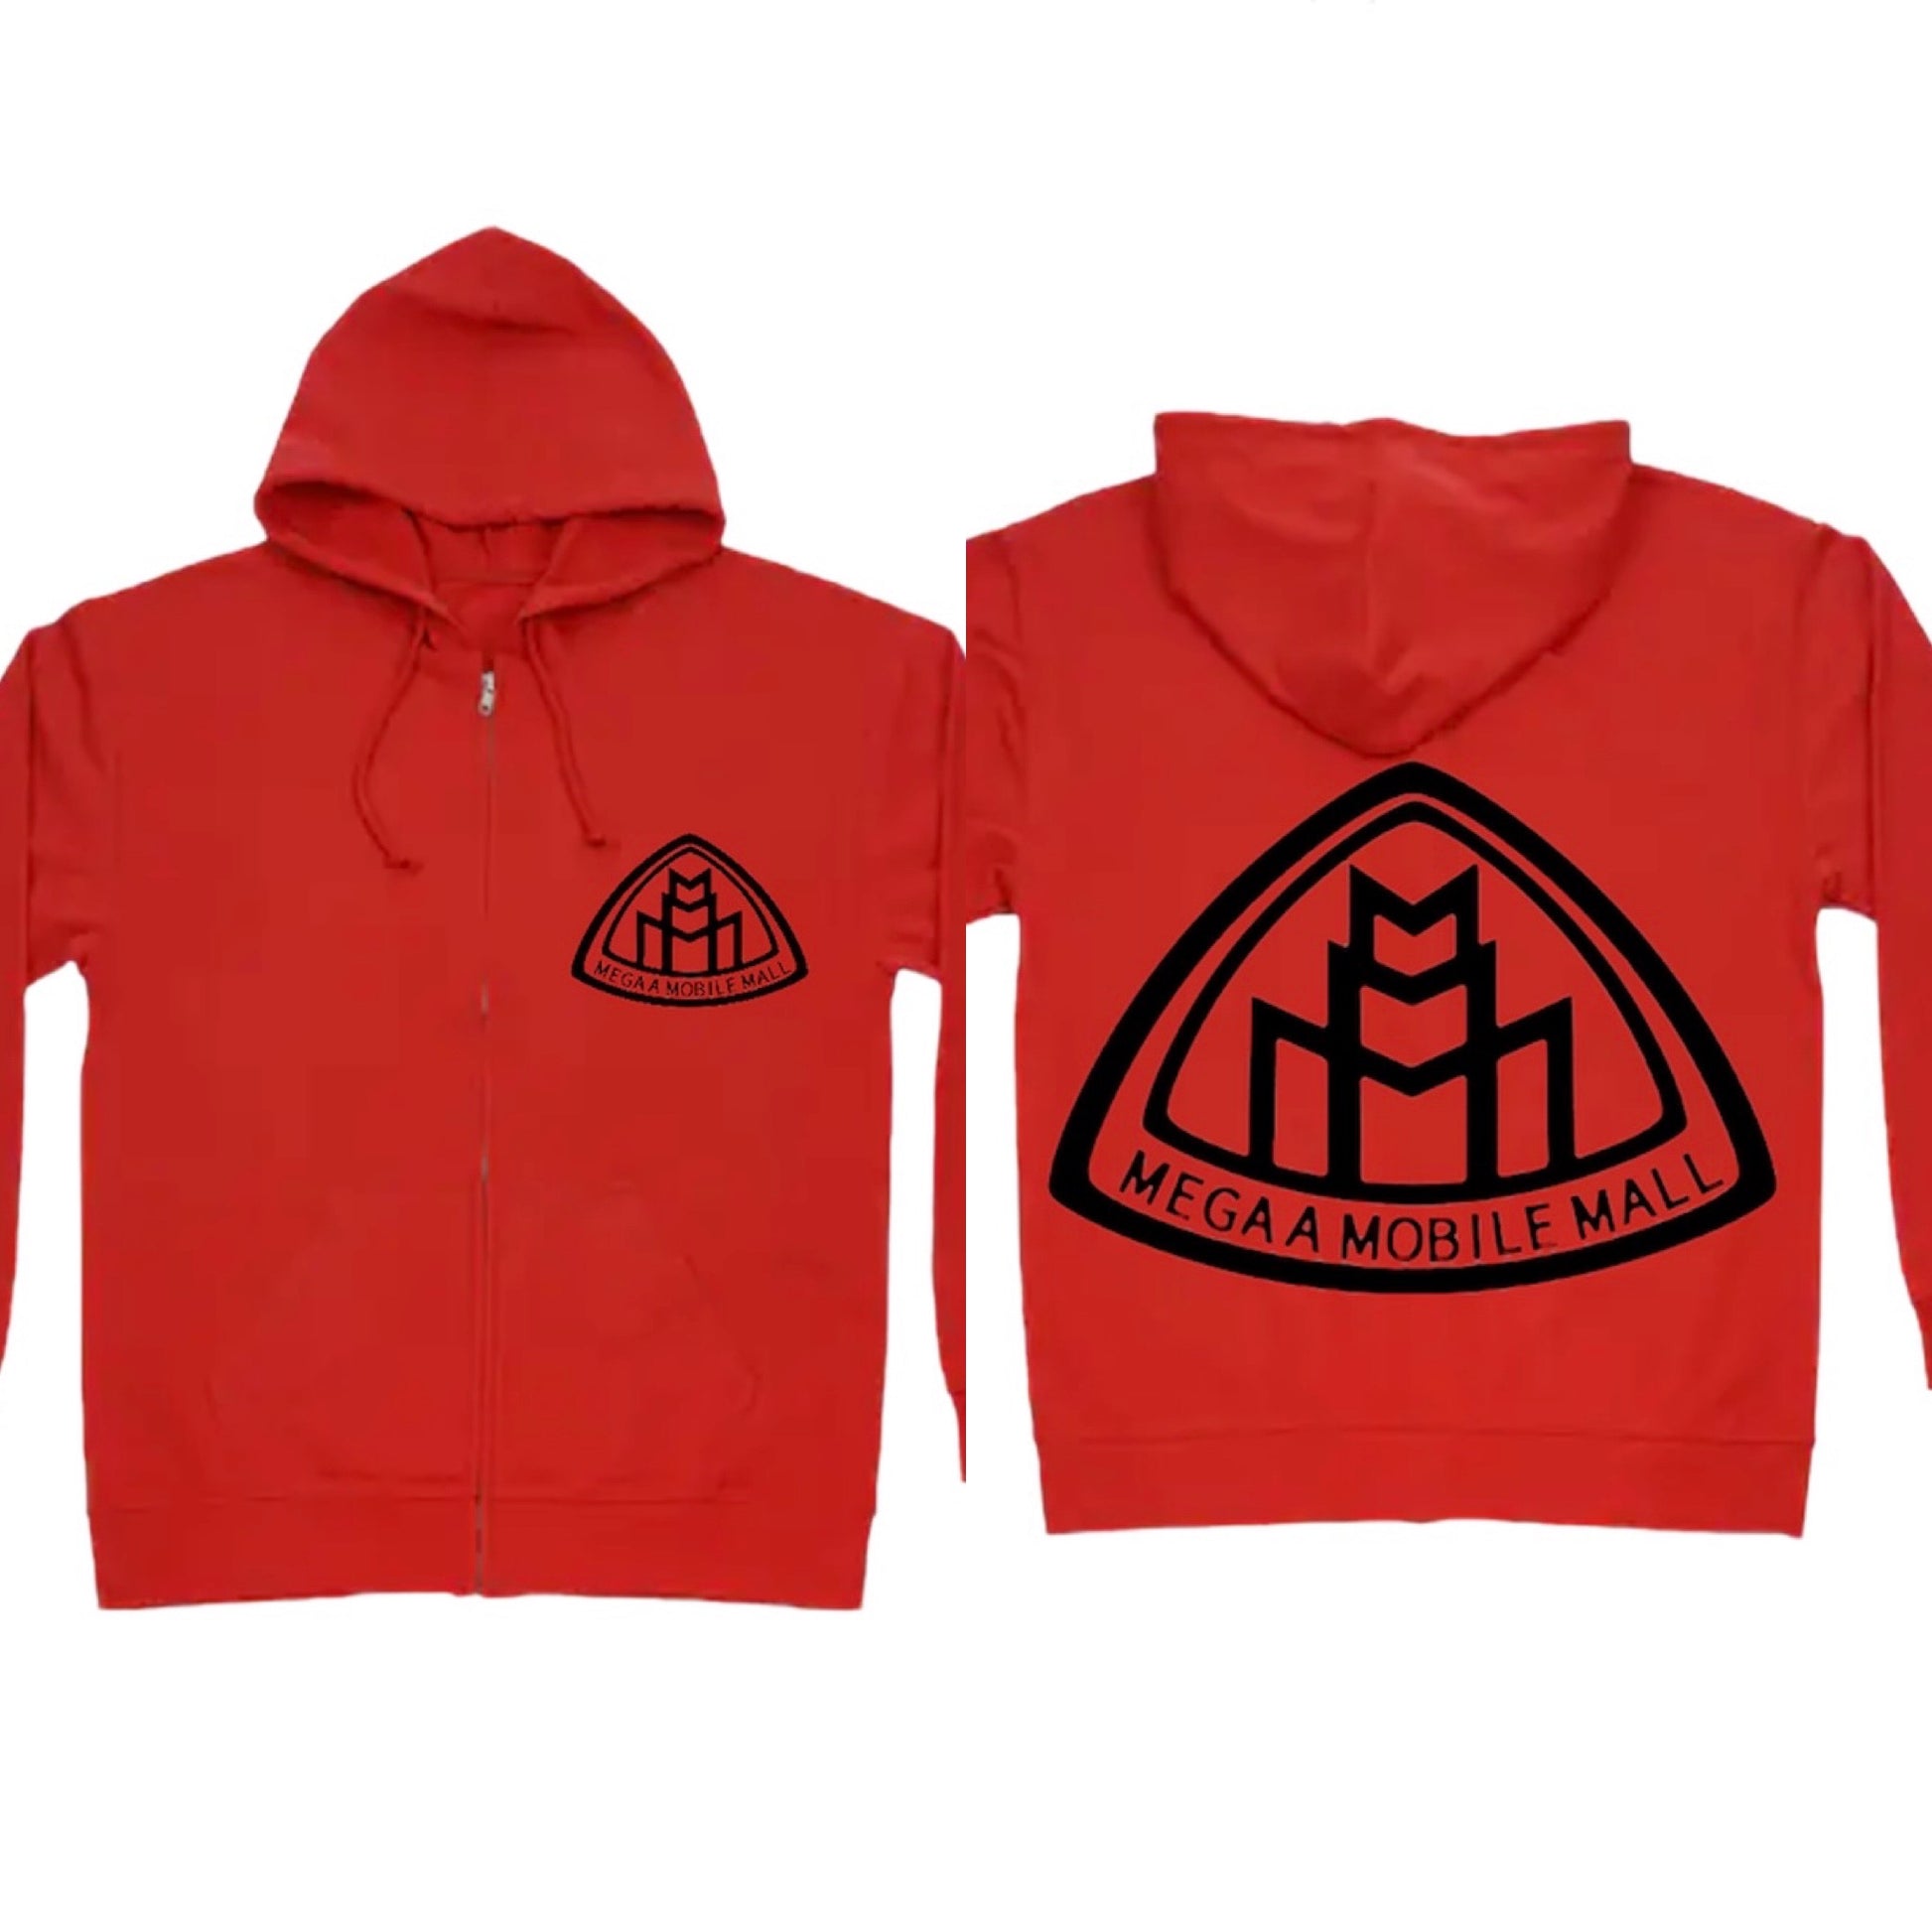 megaamobilemall red zip up hoodie with black logo